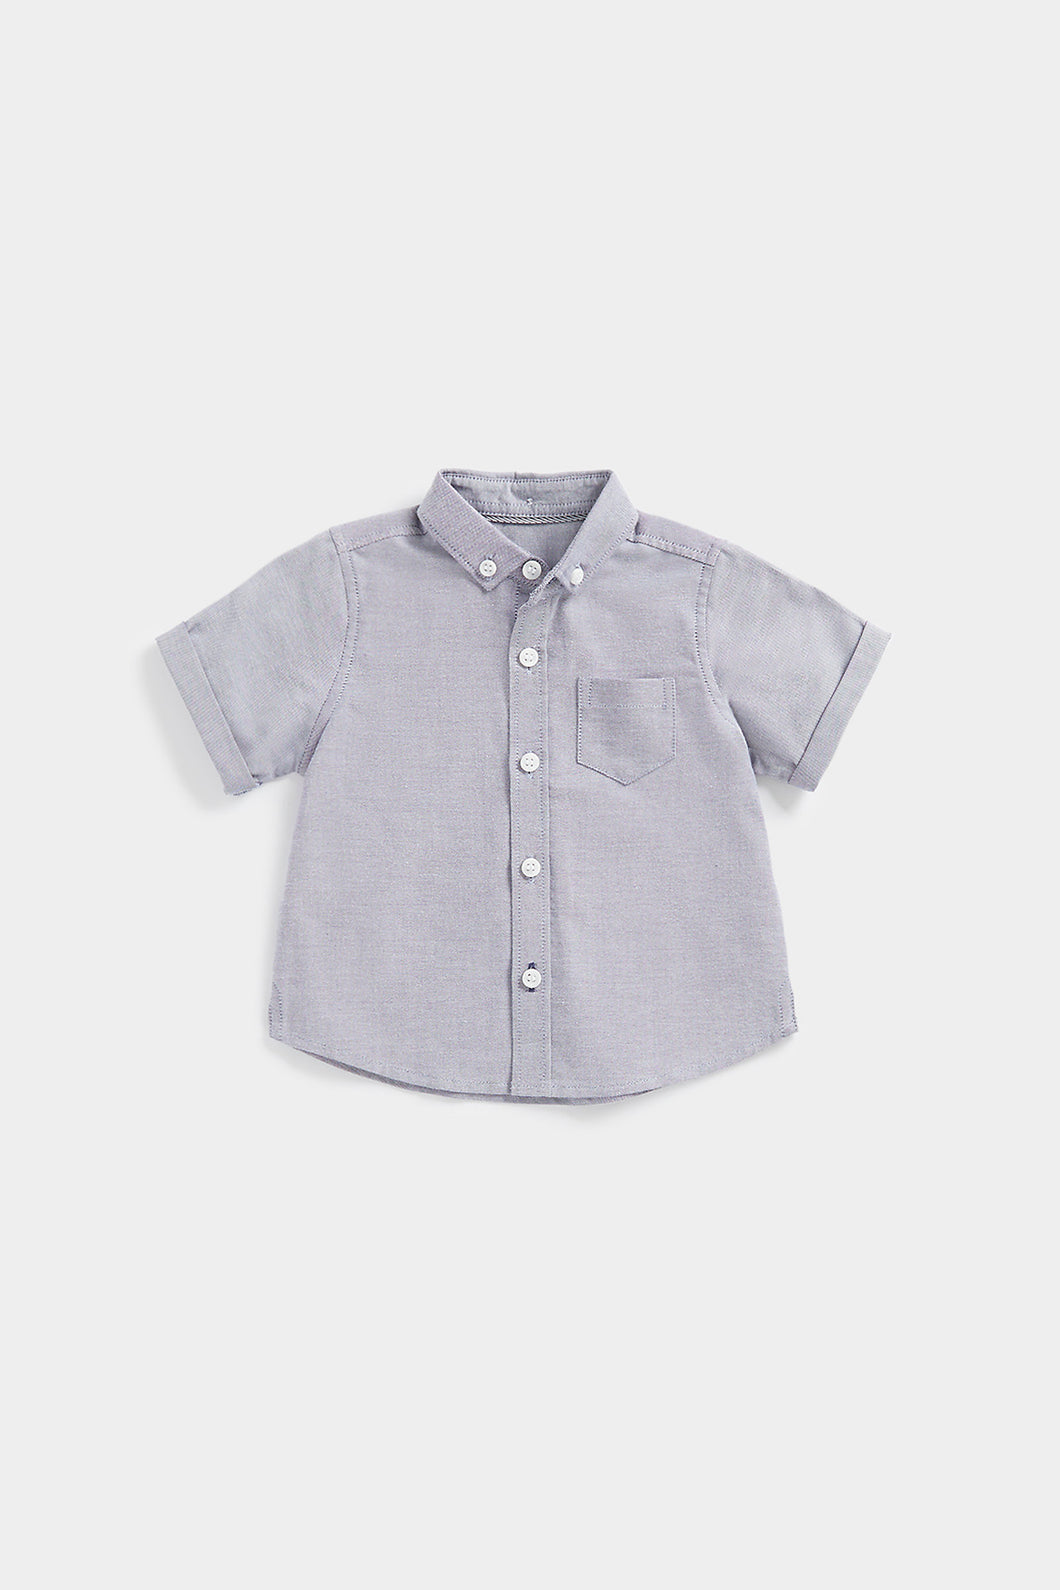 Mothercare Navy And White Oxford Shirt